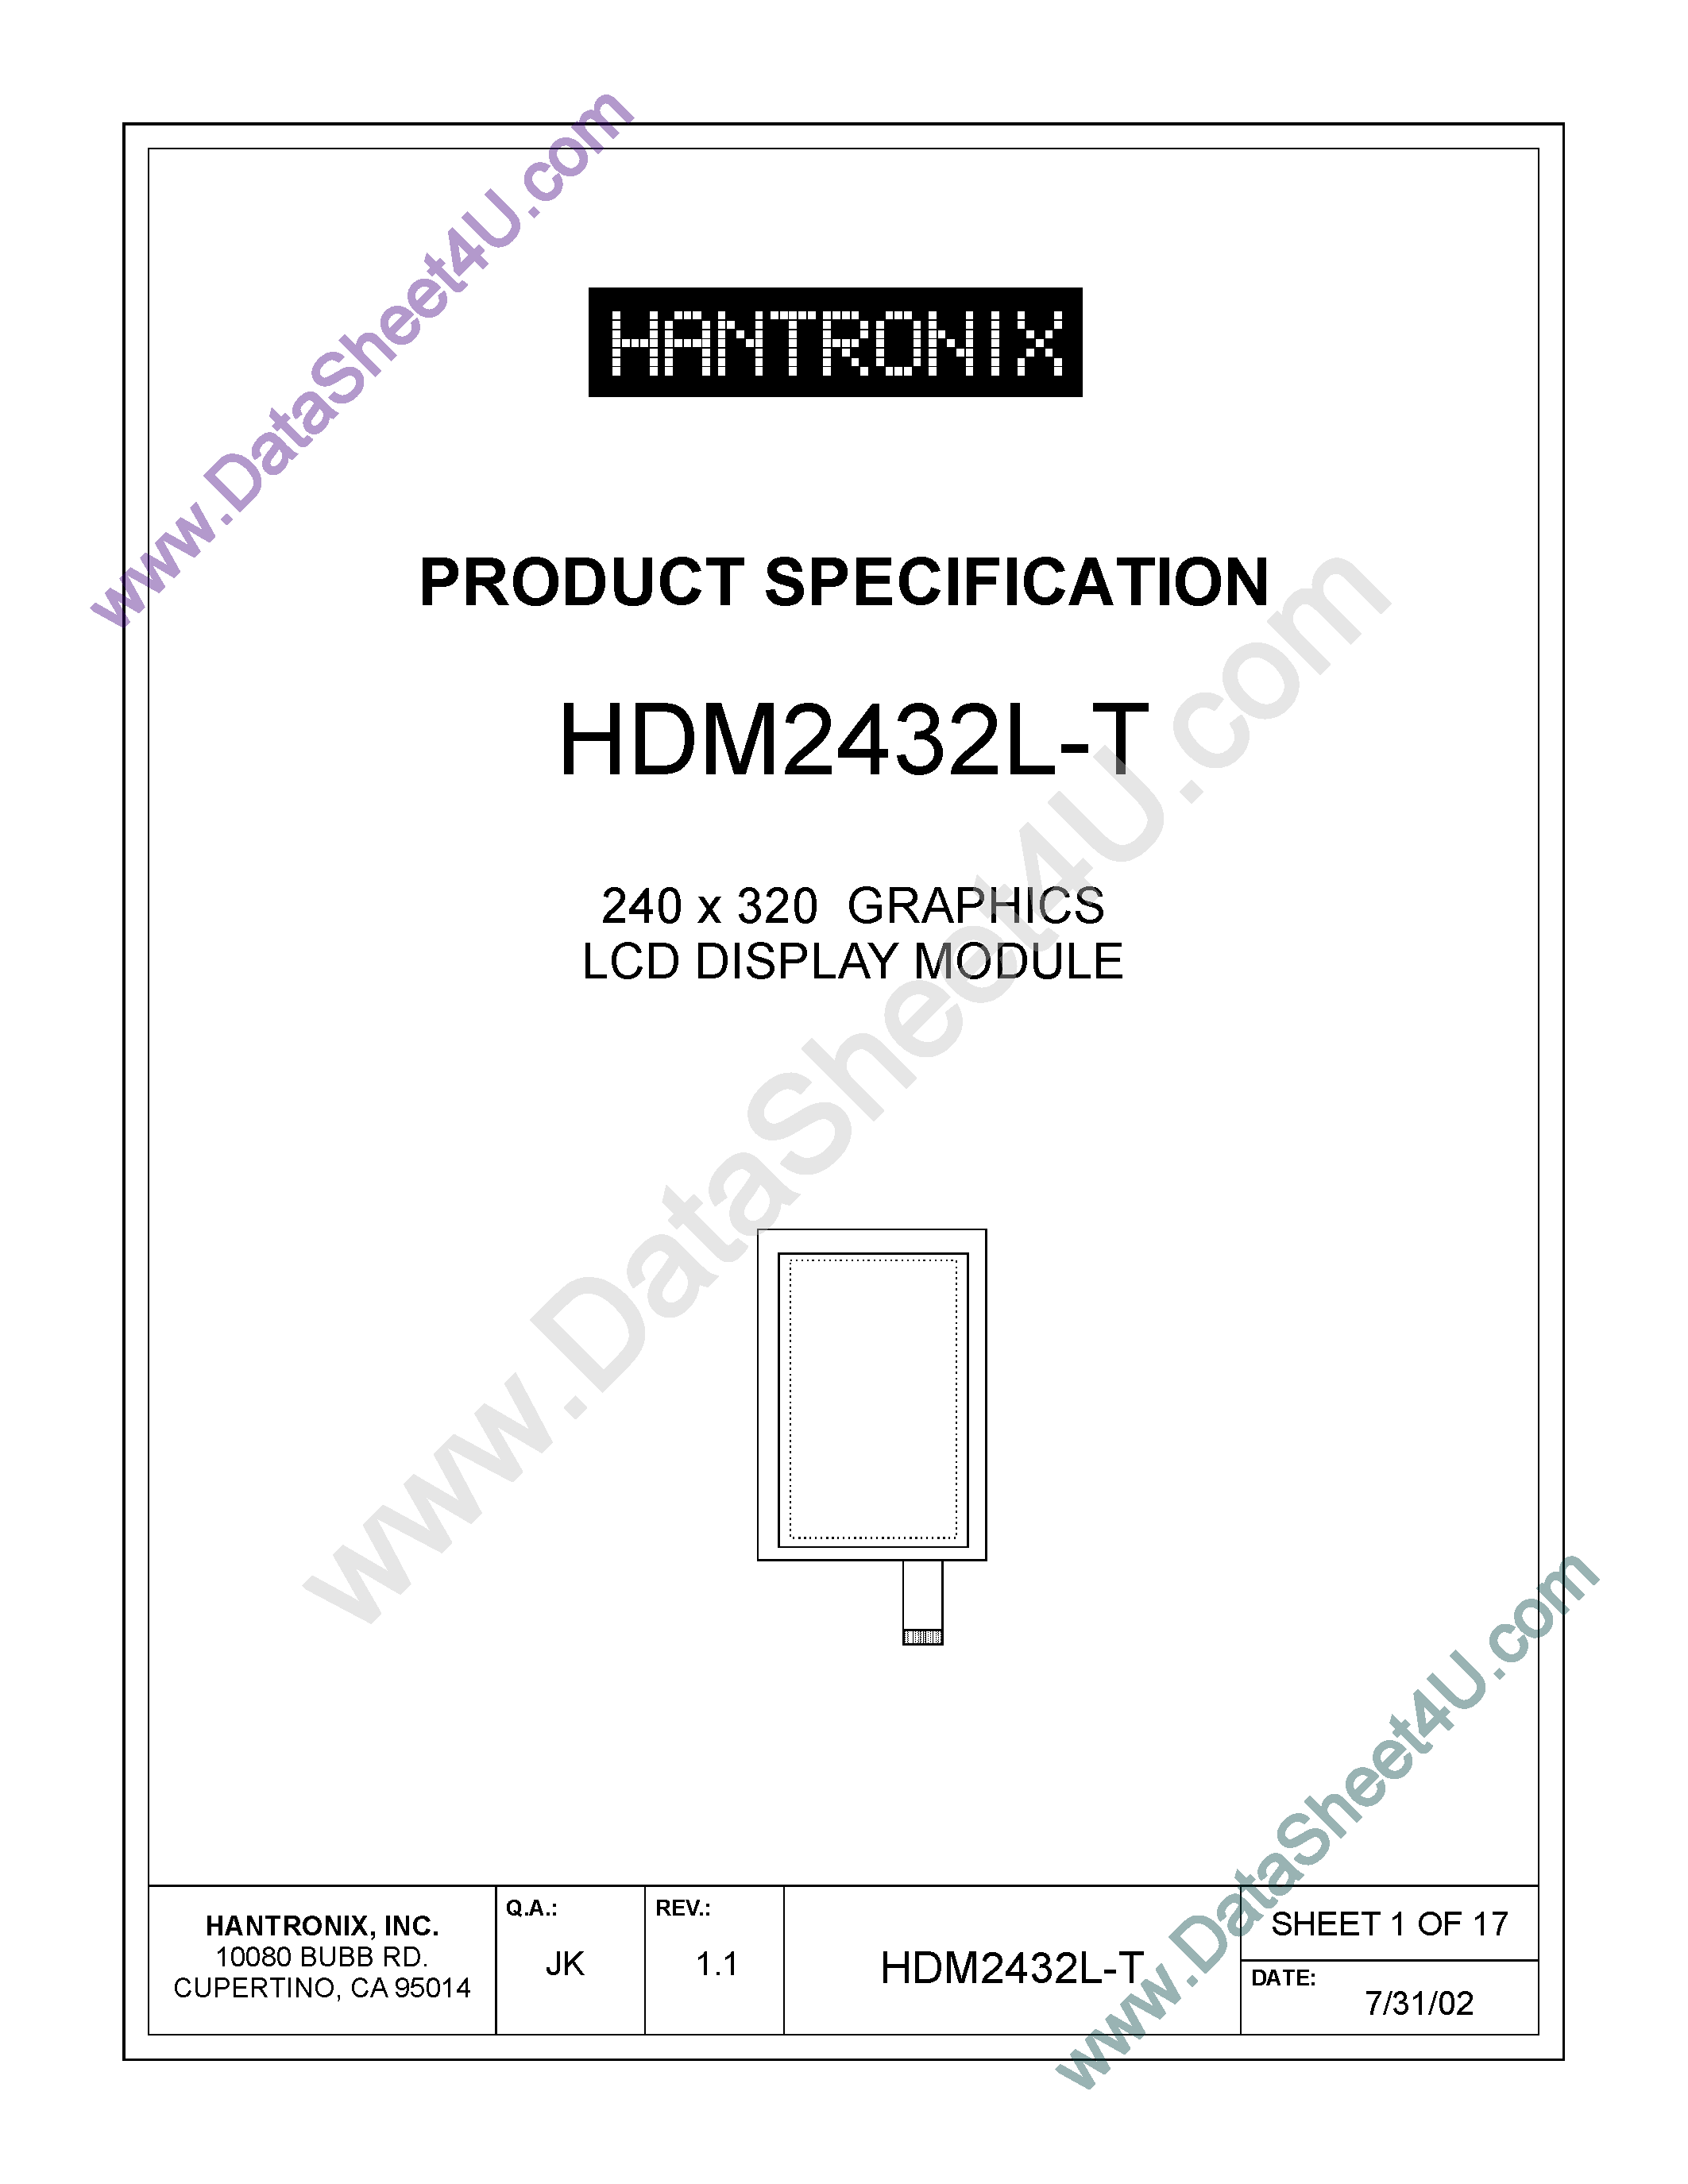 Datasheet HDMs2432l-t H - LCD DISPLAY MODULE page 1